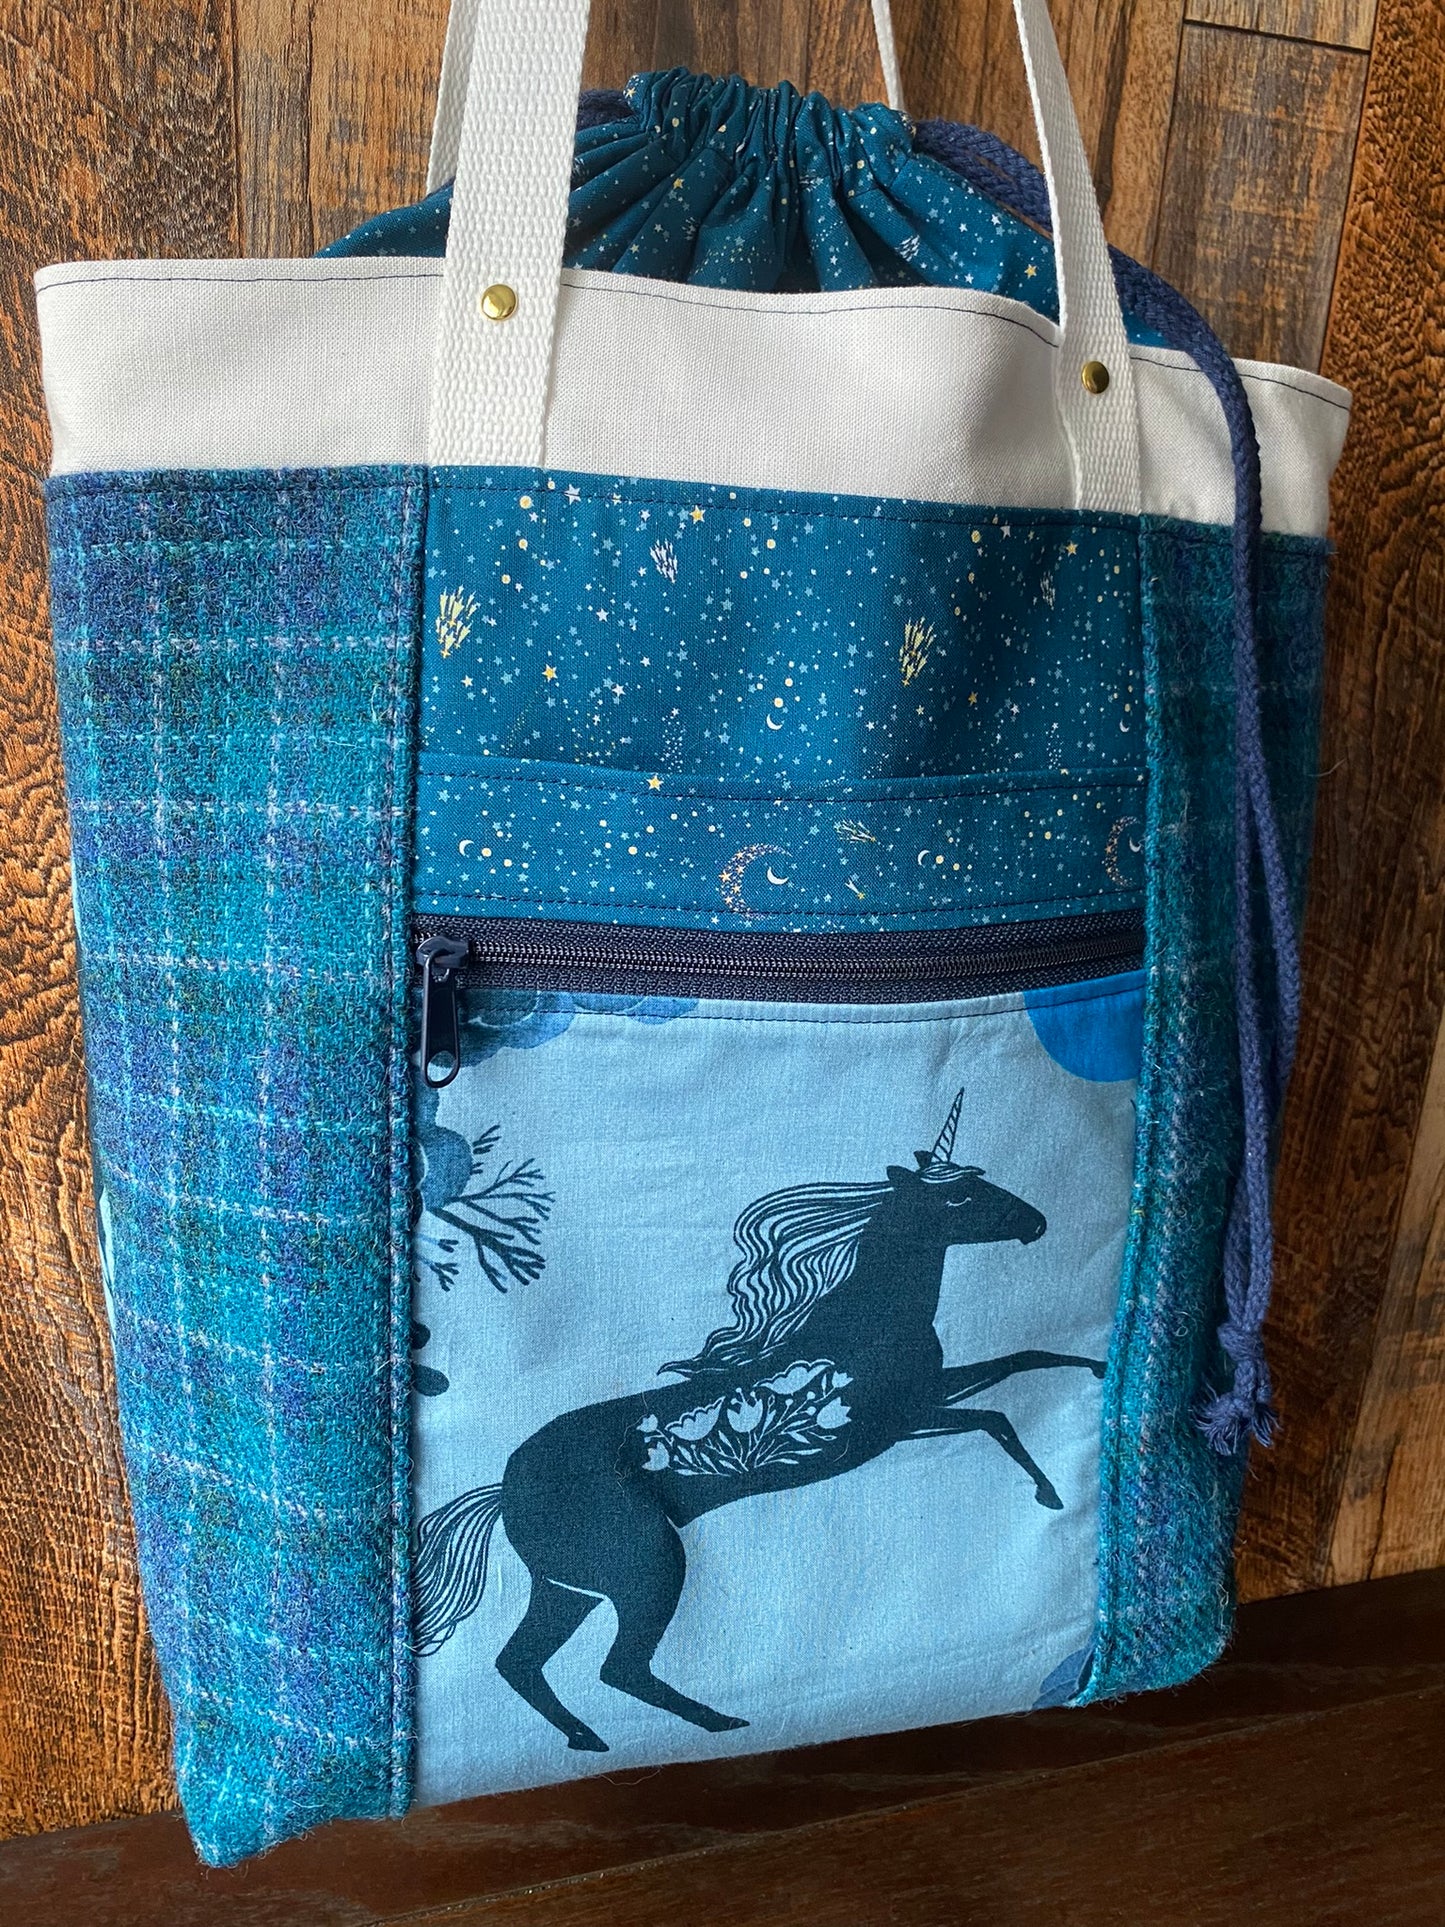 Harris Tweed and Unicorn/Sewing Machine Large Firefly Project Bag